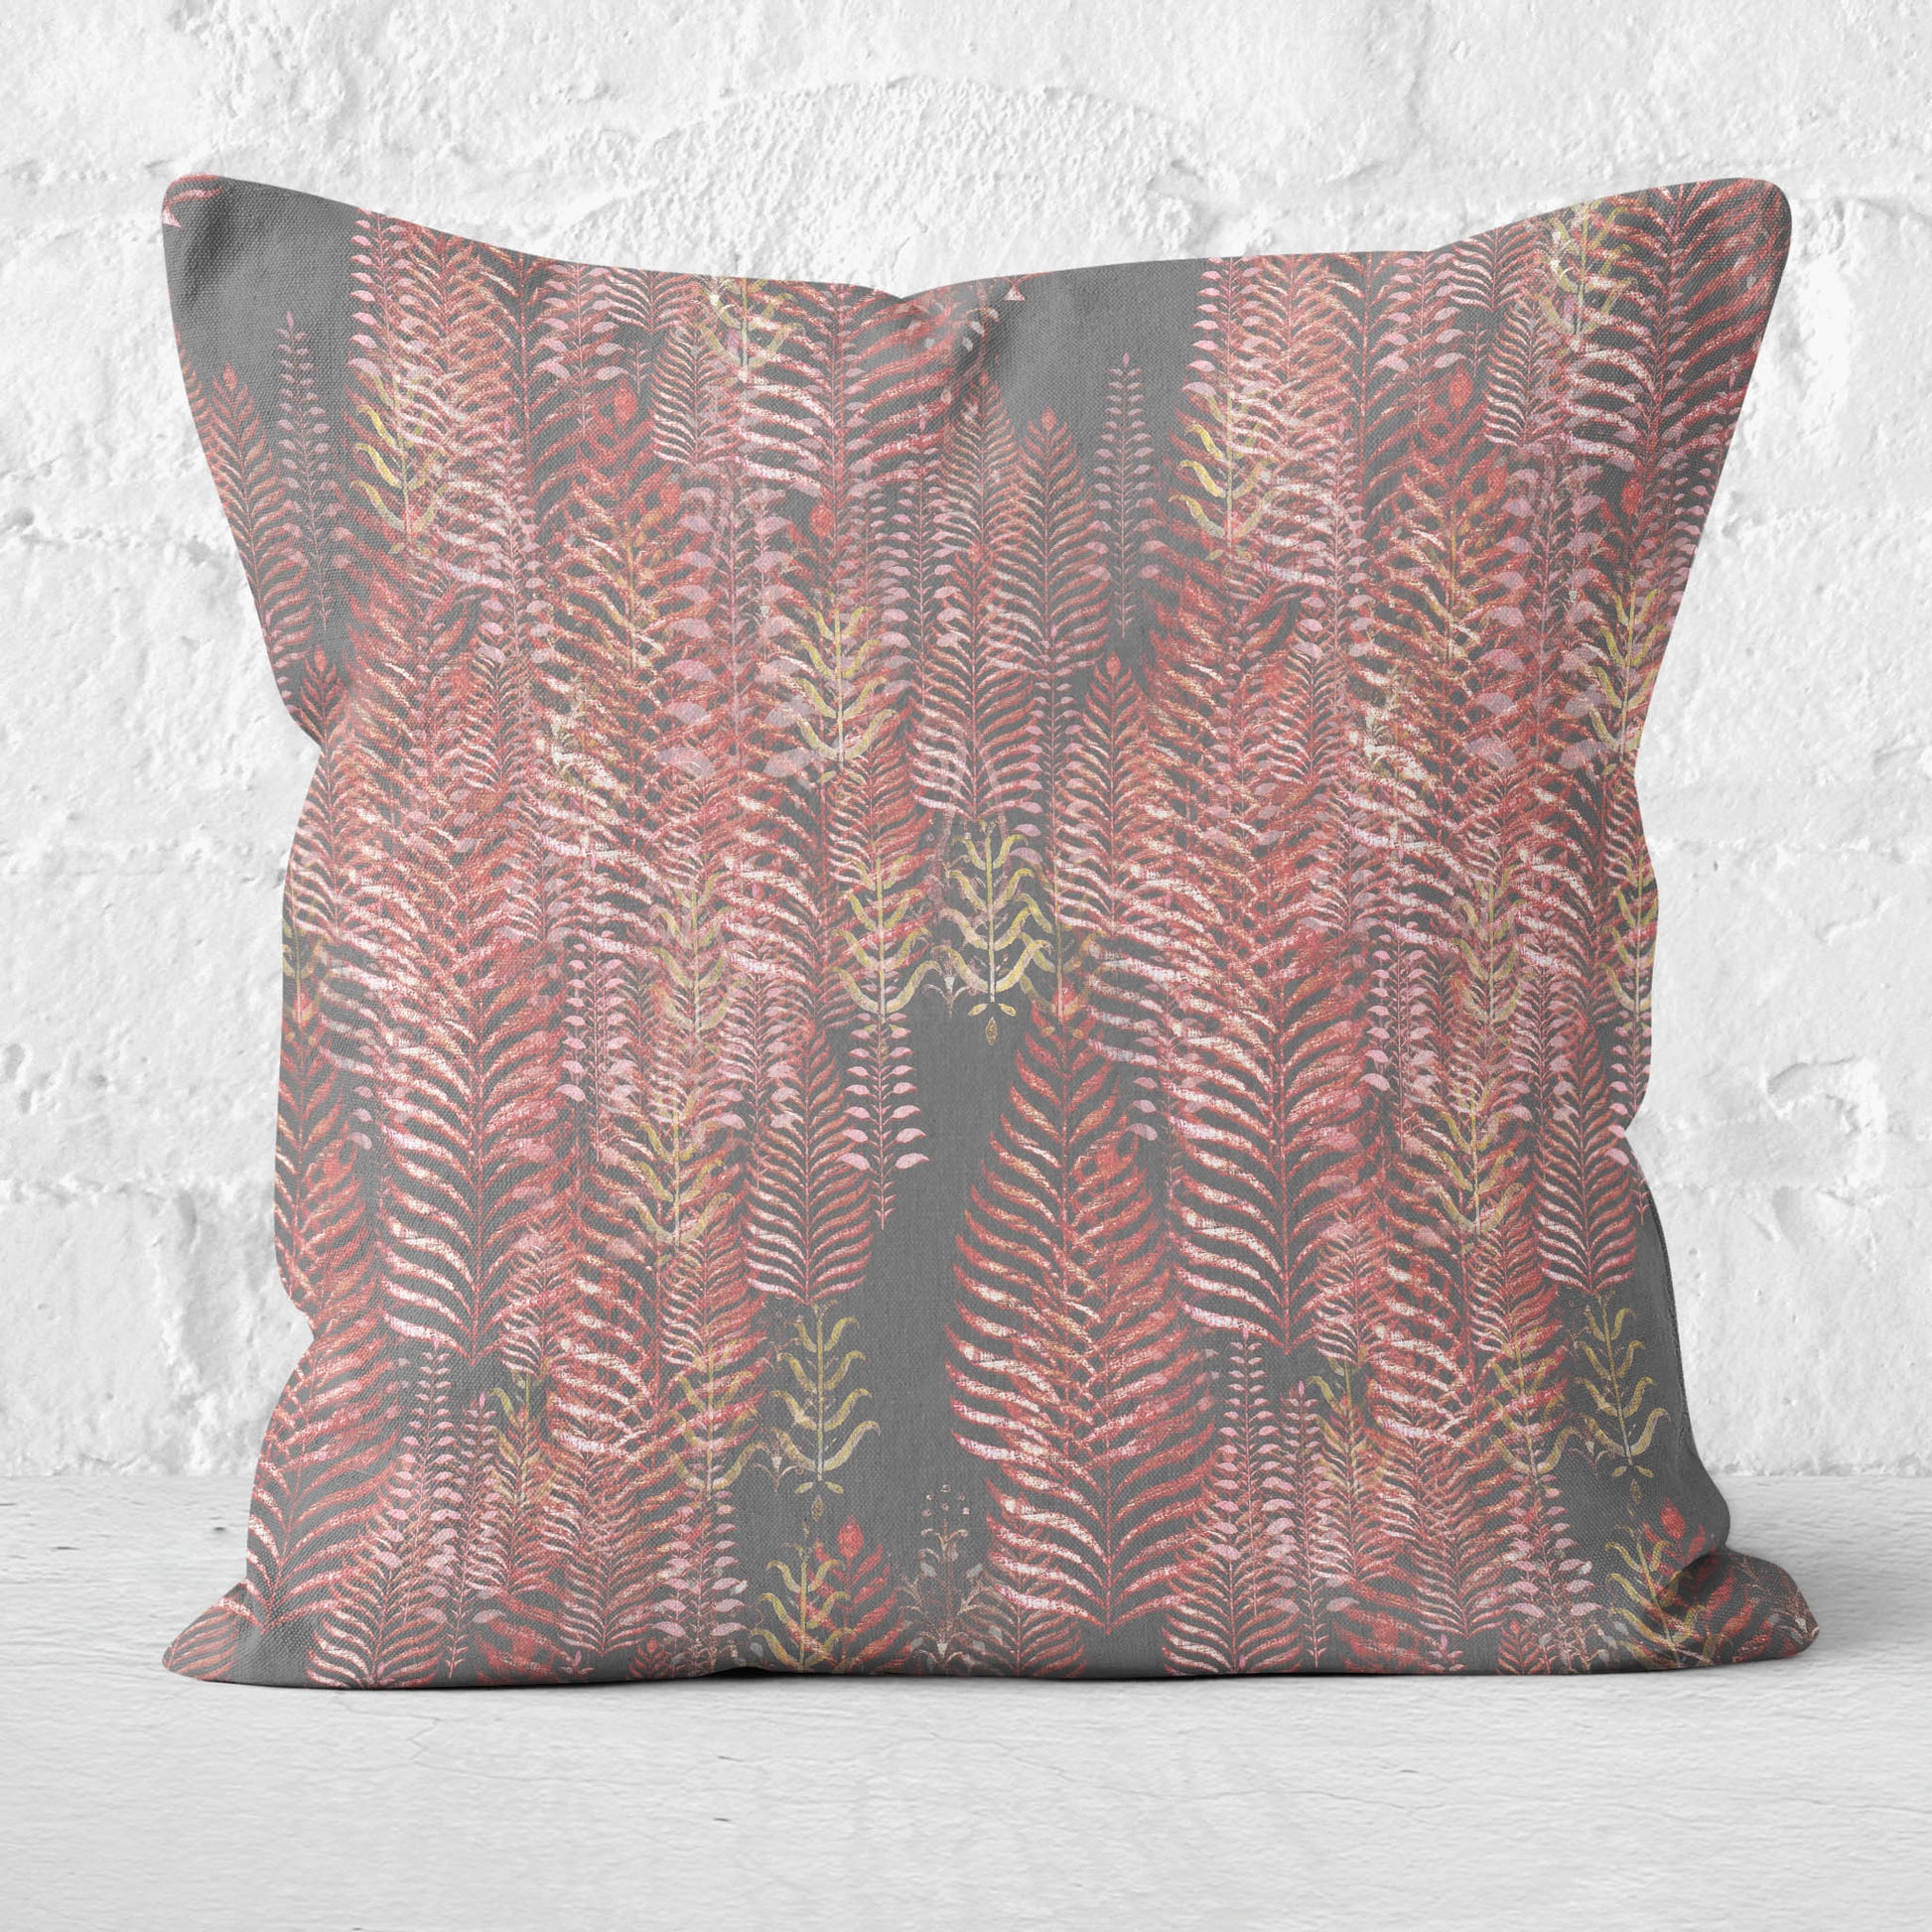 Square throw pillow set against a white brick wall, featuring a block print tree pattern in pink and gray tones.